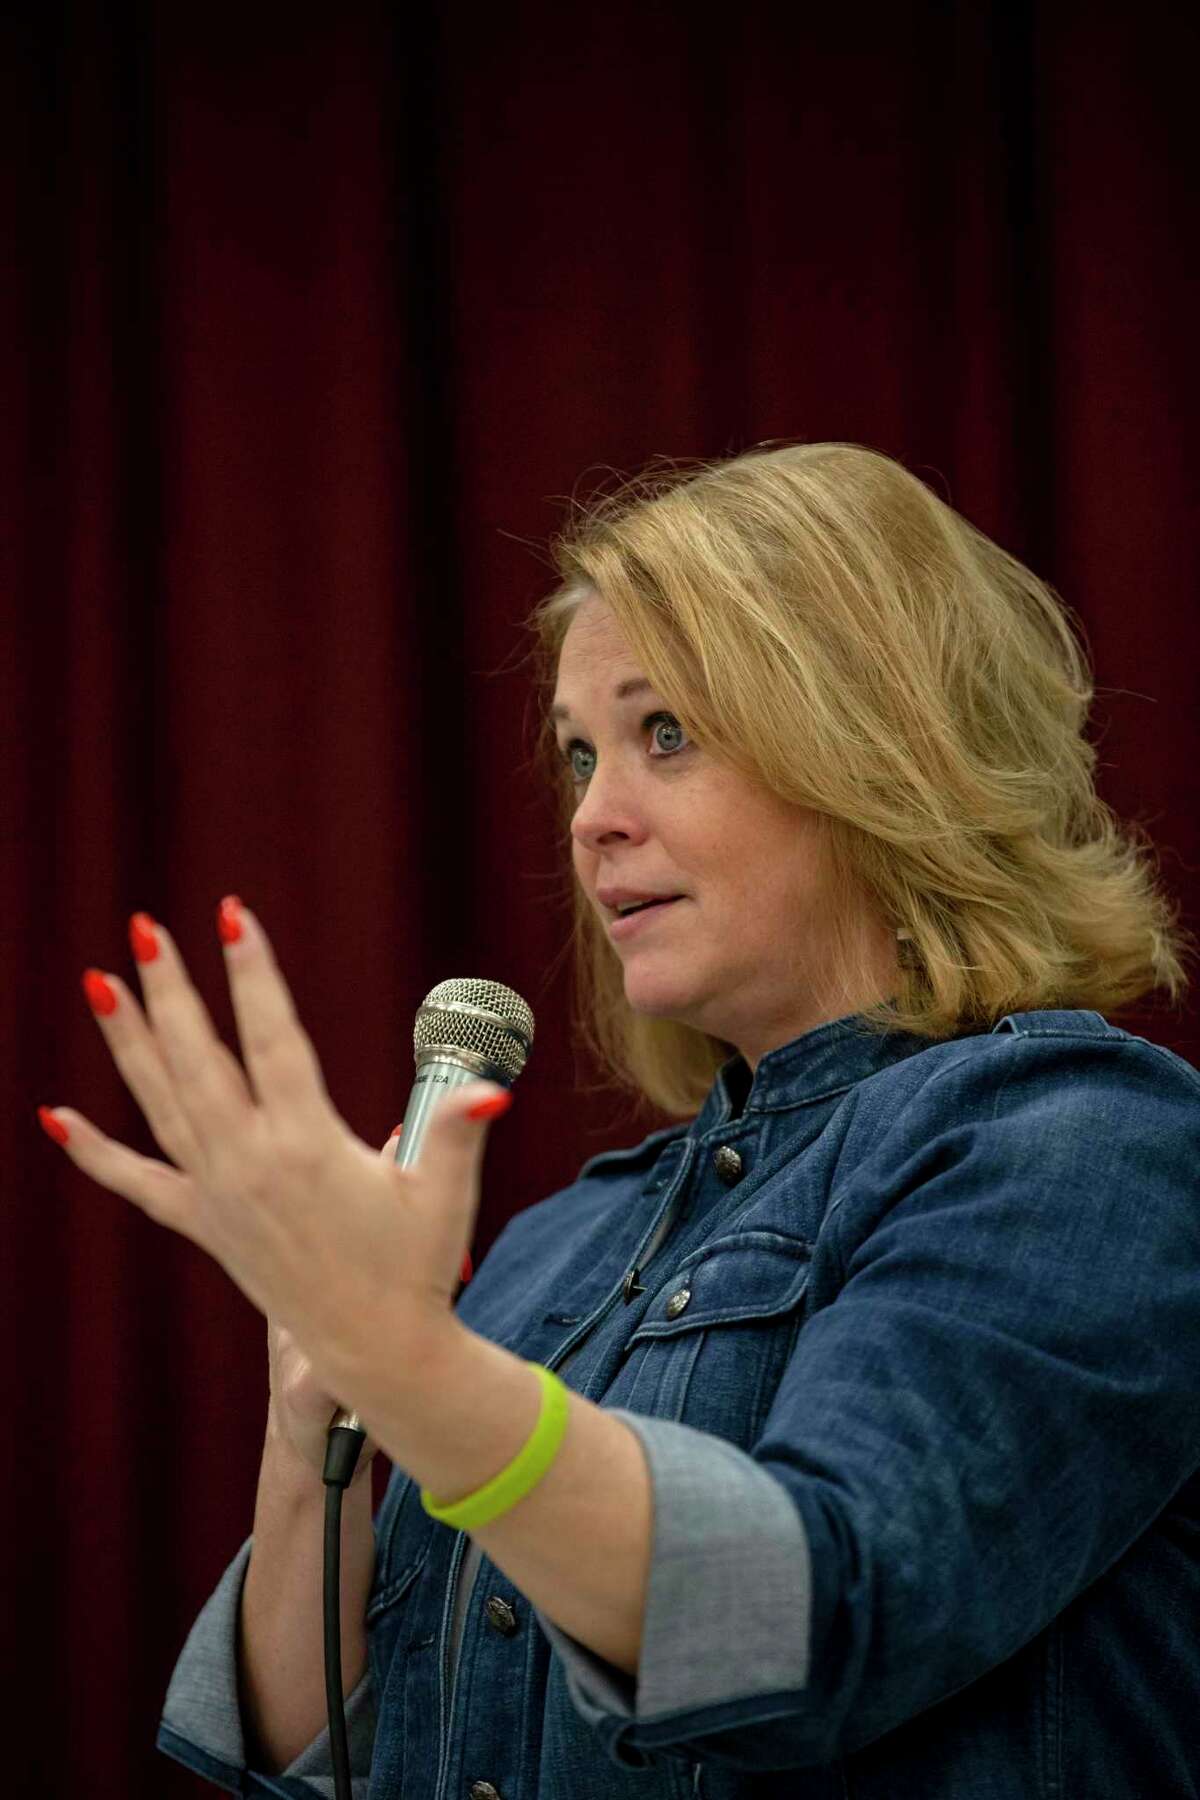 Director of Metro Health Dawn Emerick addresses community concerns about the new coronavirus, called COVID-19 during a District 4 forum on public safety held at John Glenn Elementary School in San Antonio on Feb. 27, 2020.